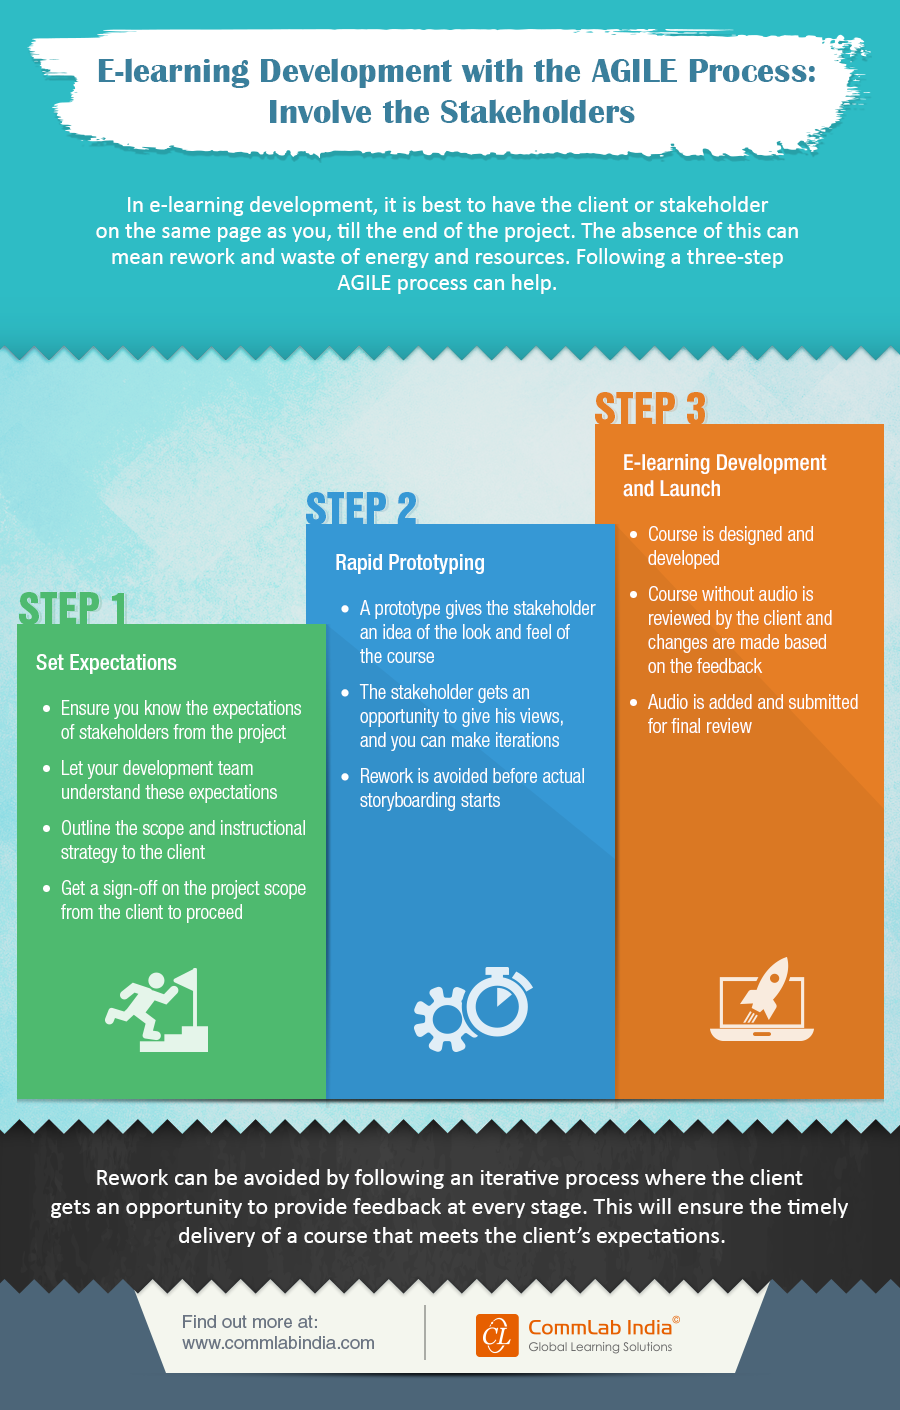 E-learning Development with the AGILE Process: Involve the Stakeholders [Infographic]